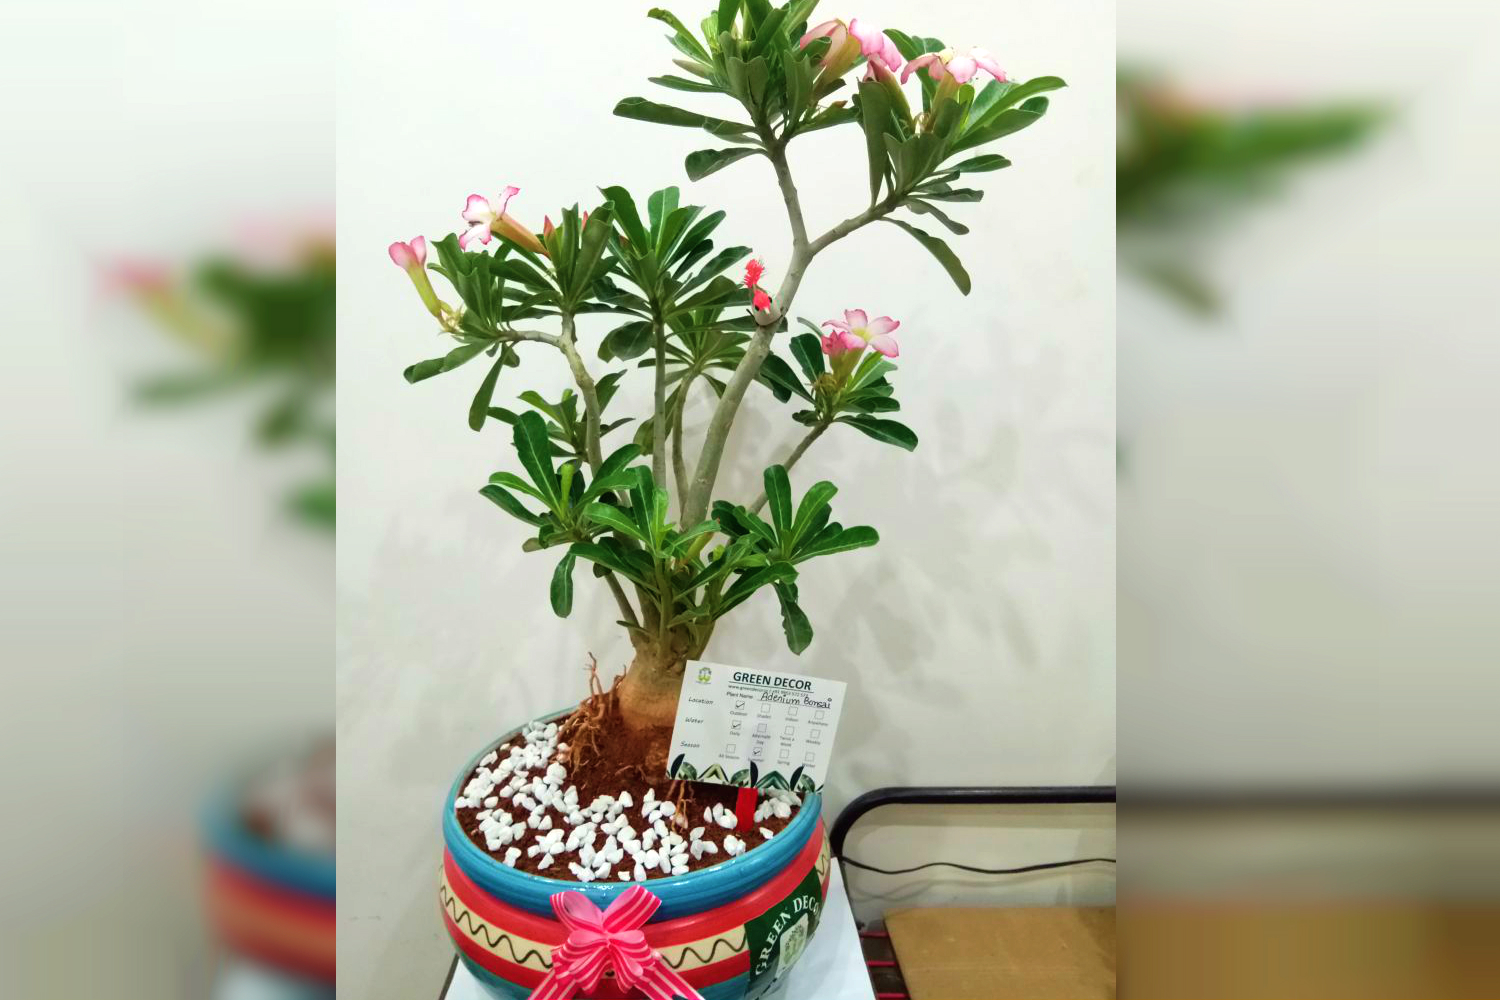 Buy Adenium Obesum Plants , White Pots and seeds in Delhi NCR by the best online nursery shop Greendecor.